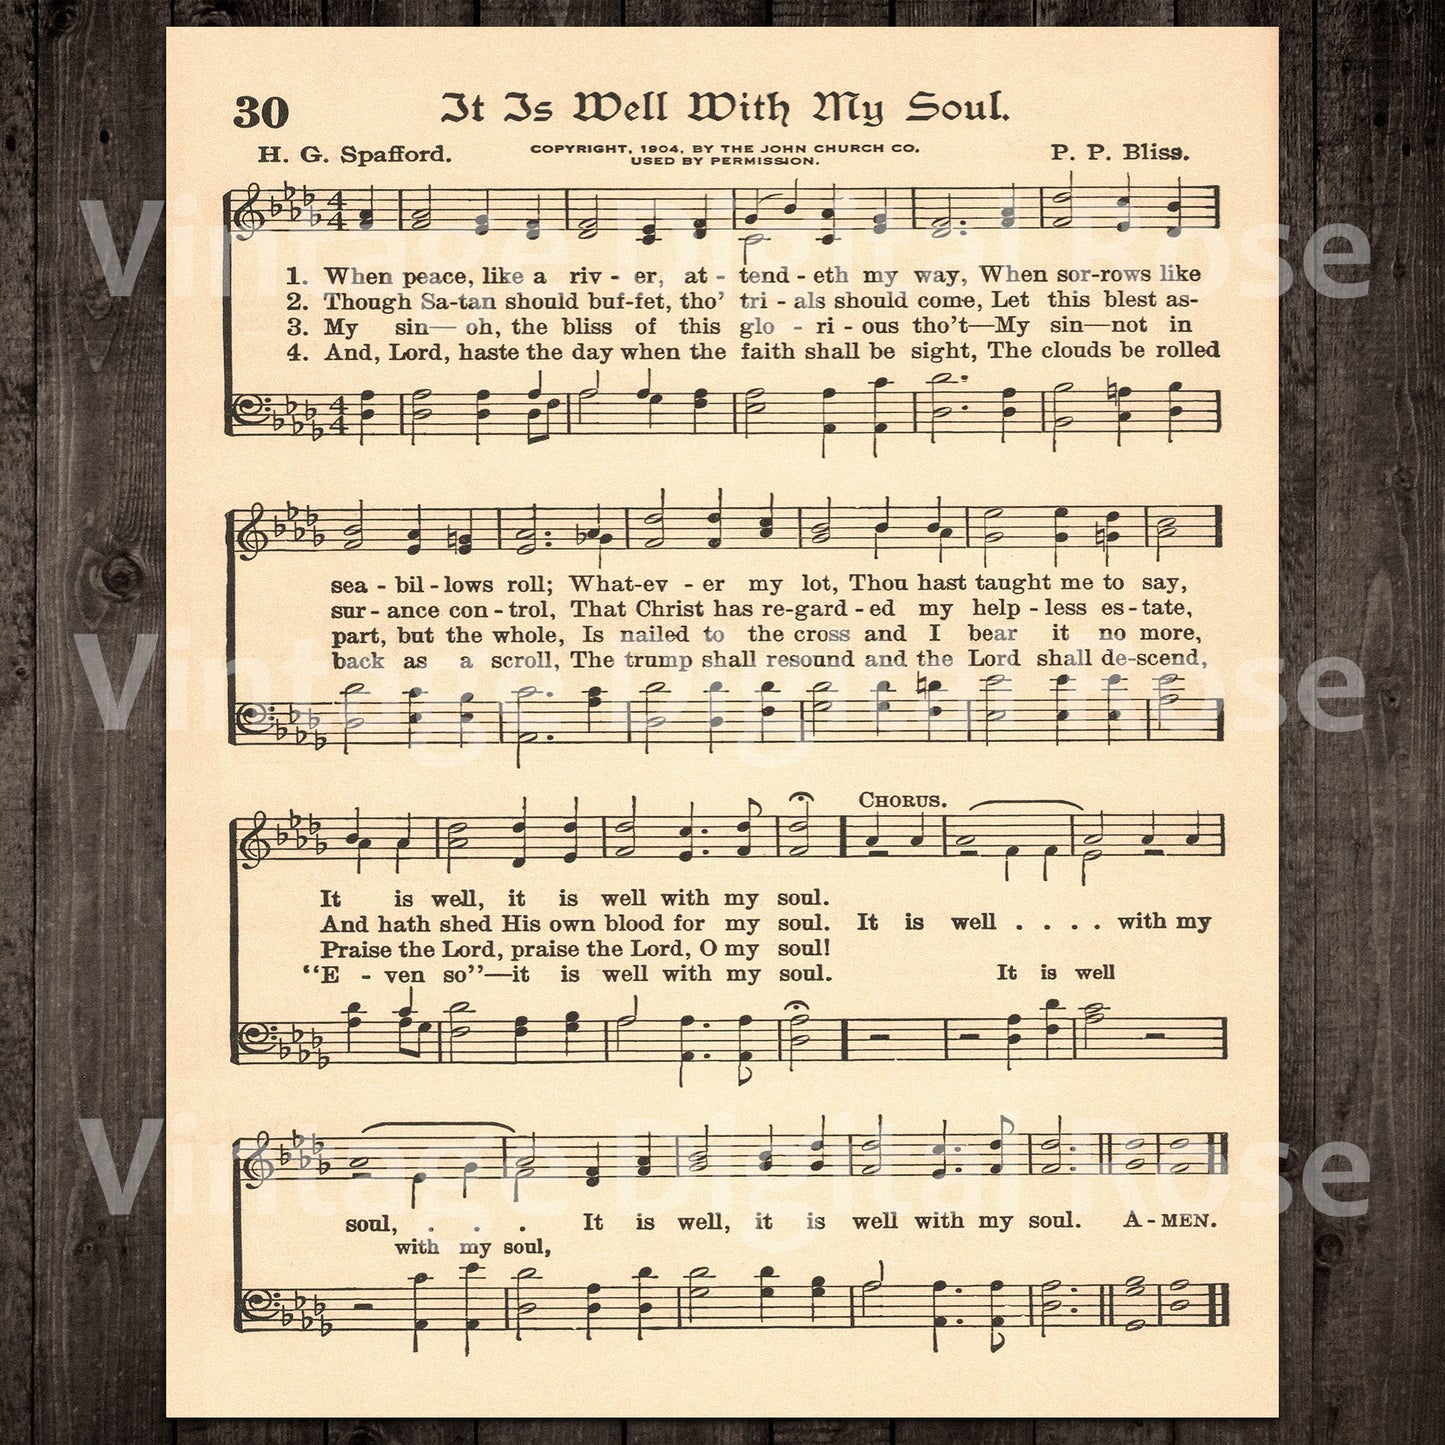 Printable Vintage Hymns Set of 3 Sheet Music Best Sellers Top Songs - The Old Rugged Cross, In the Garden, It Is Well With My Soul